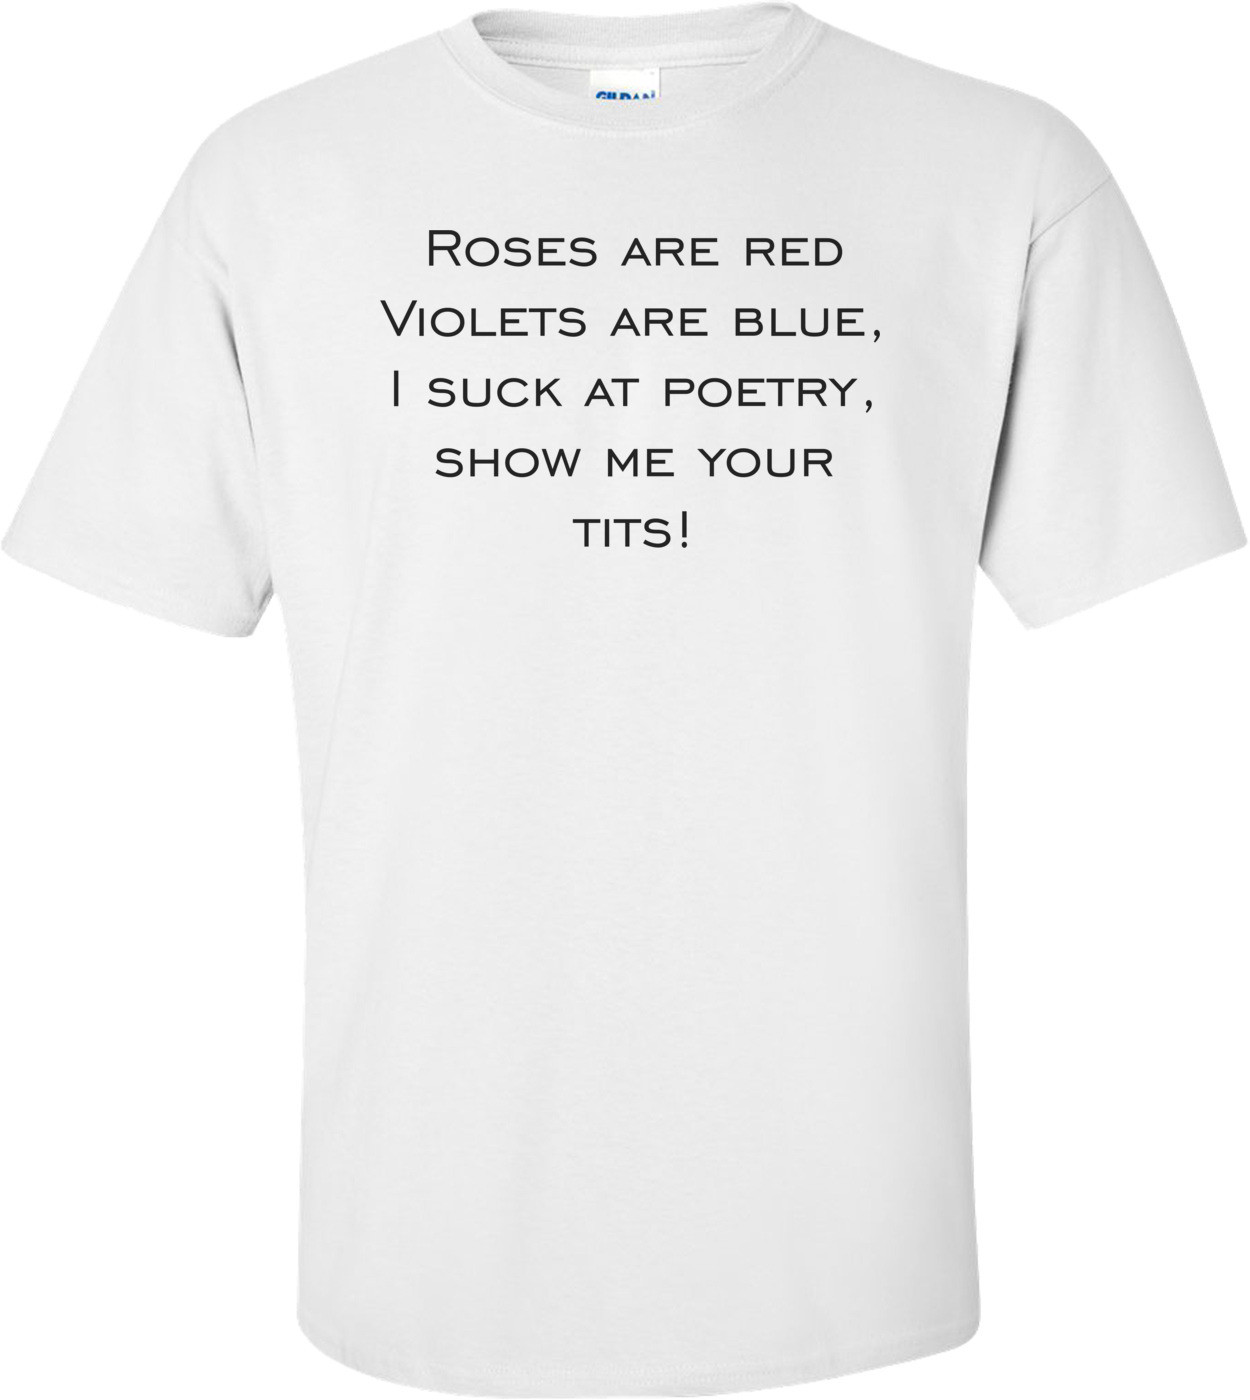 Roses are red Violets are blue, I suck at poetry, show me your tits!